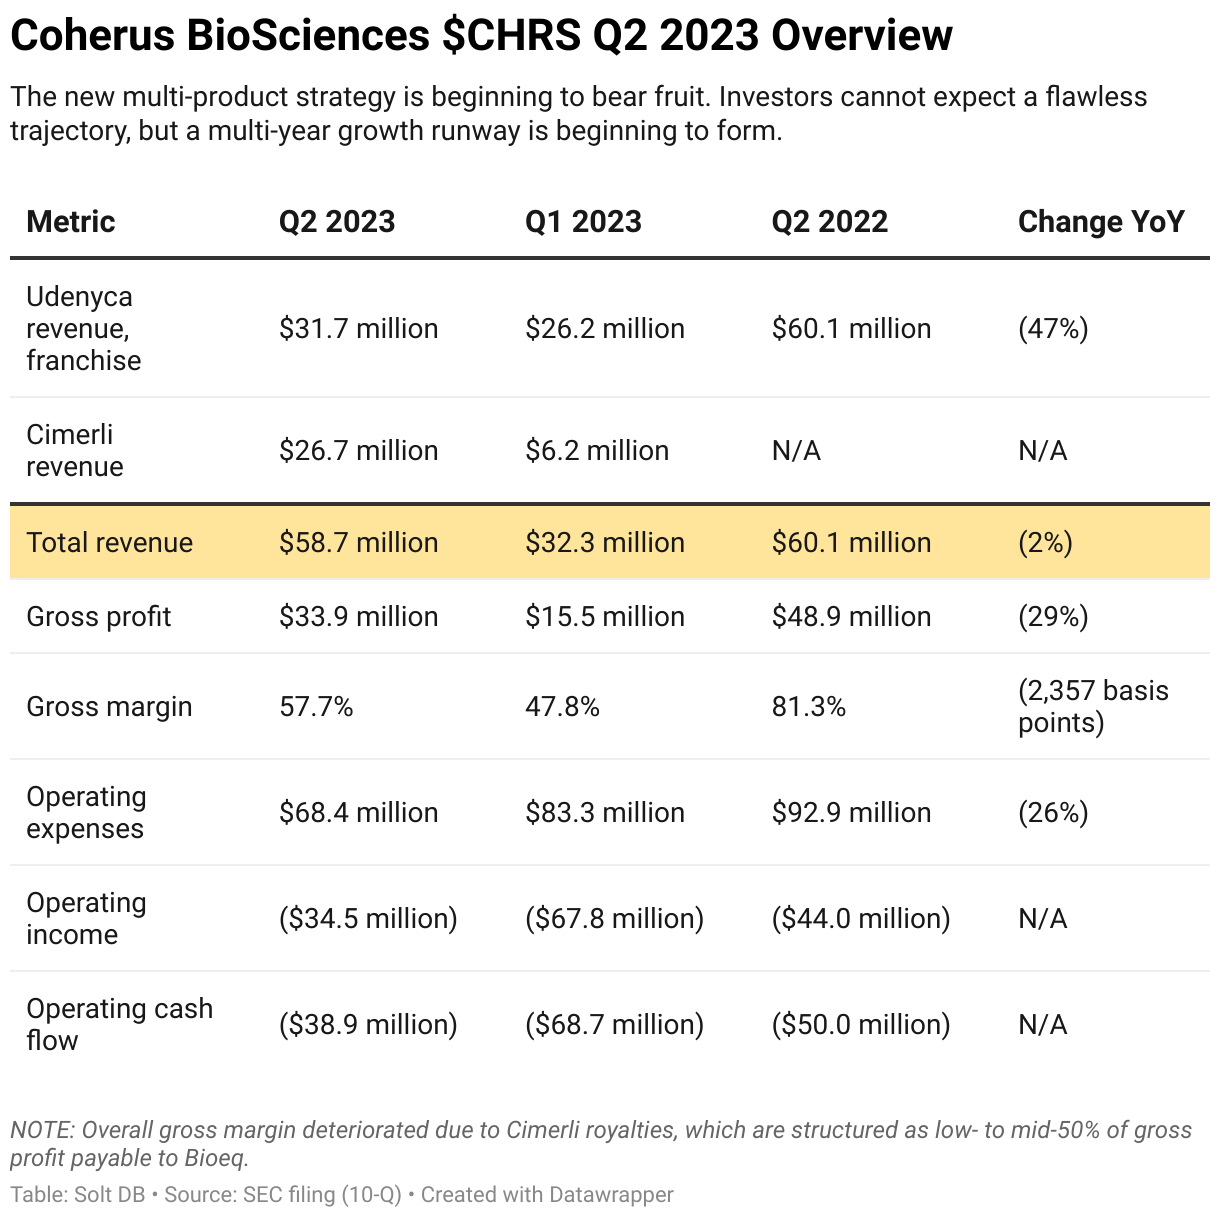 A table showing recent financial data for Coherus BioSciences.